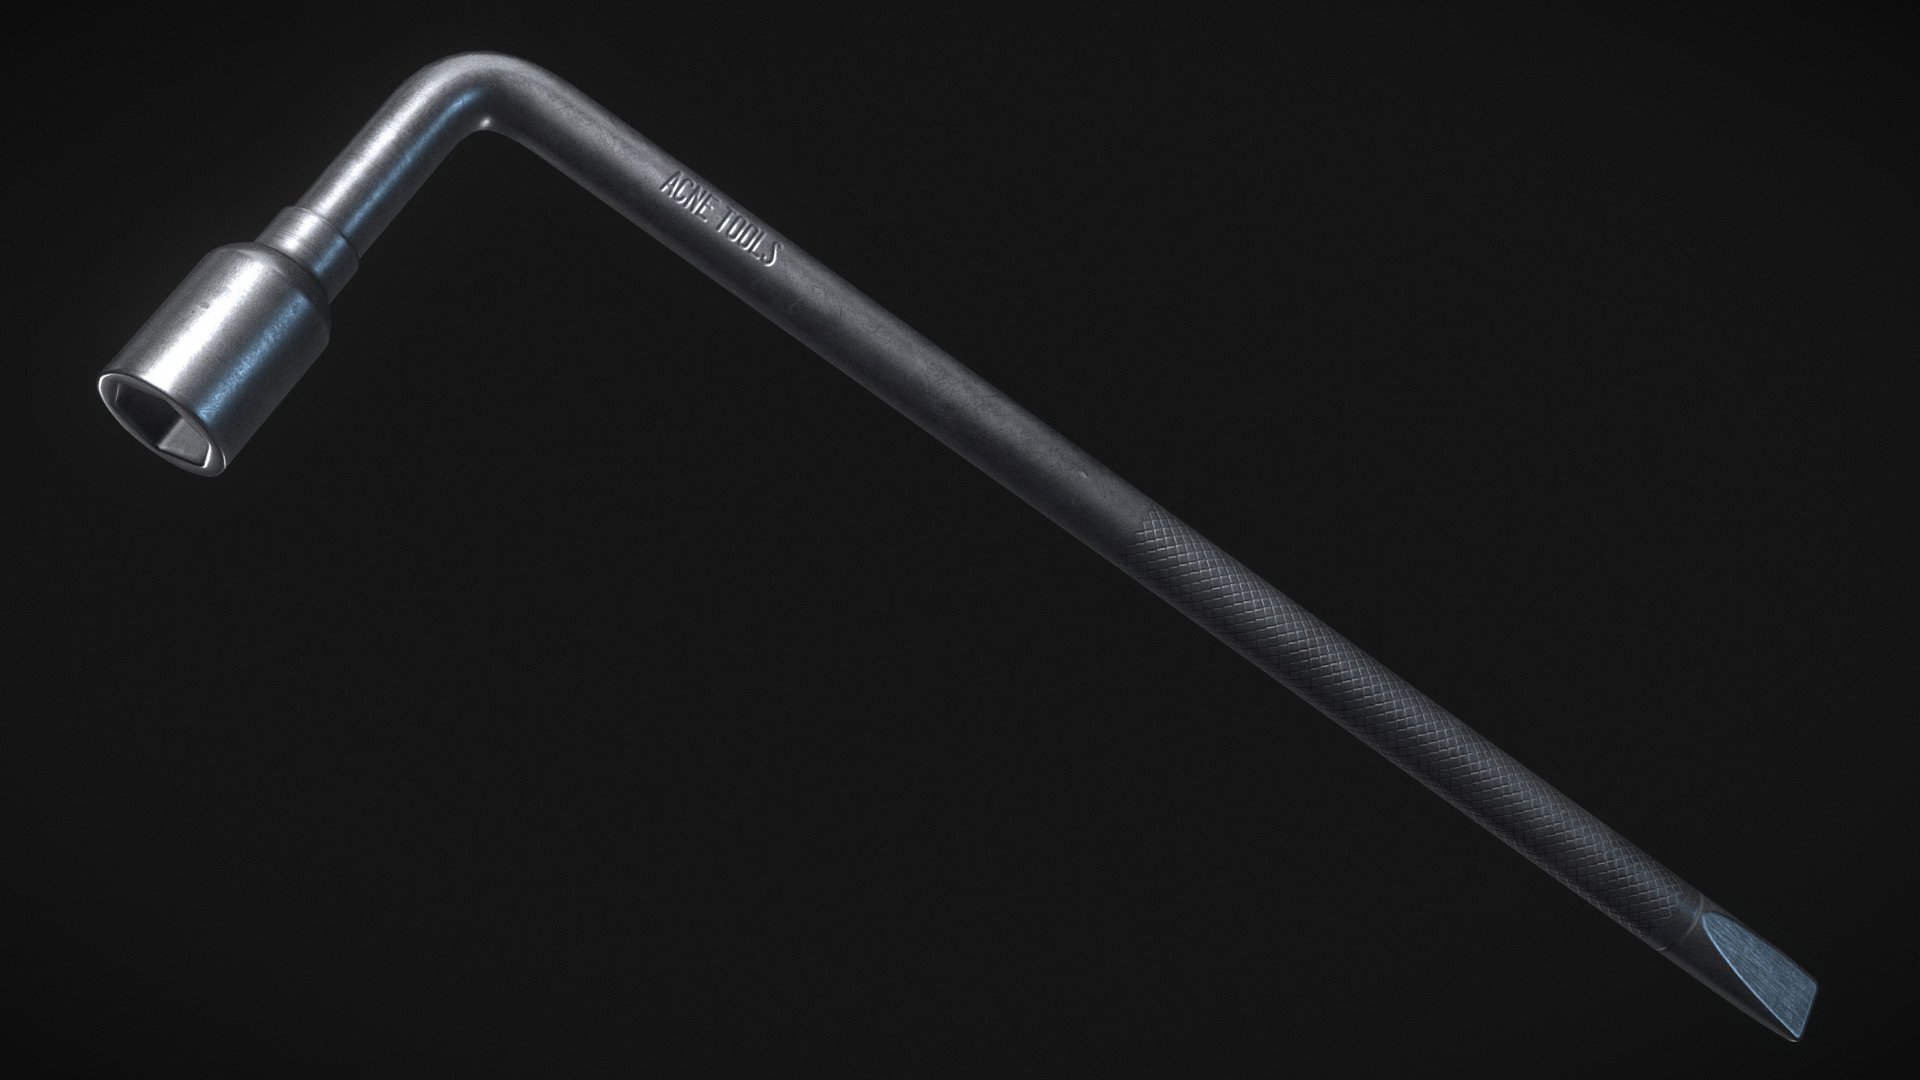 A tire iron or lug wrench, whatever you call it.

For Jabroni Brawl: Episode 3. https://store.steampowered.com/app/869480/Jabroni_Brawl_Episode_3/

Modelled in Blender. Baked in Marmoset Toolbag. Textured In Substance Painter 3d model